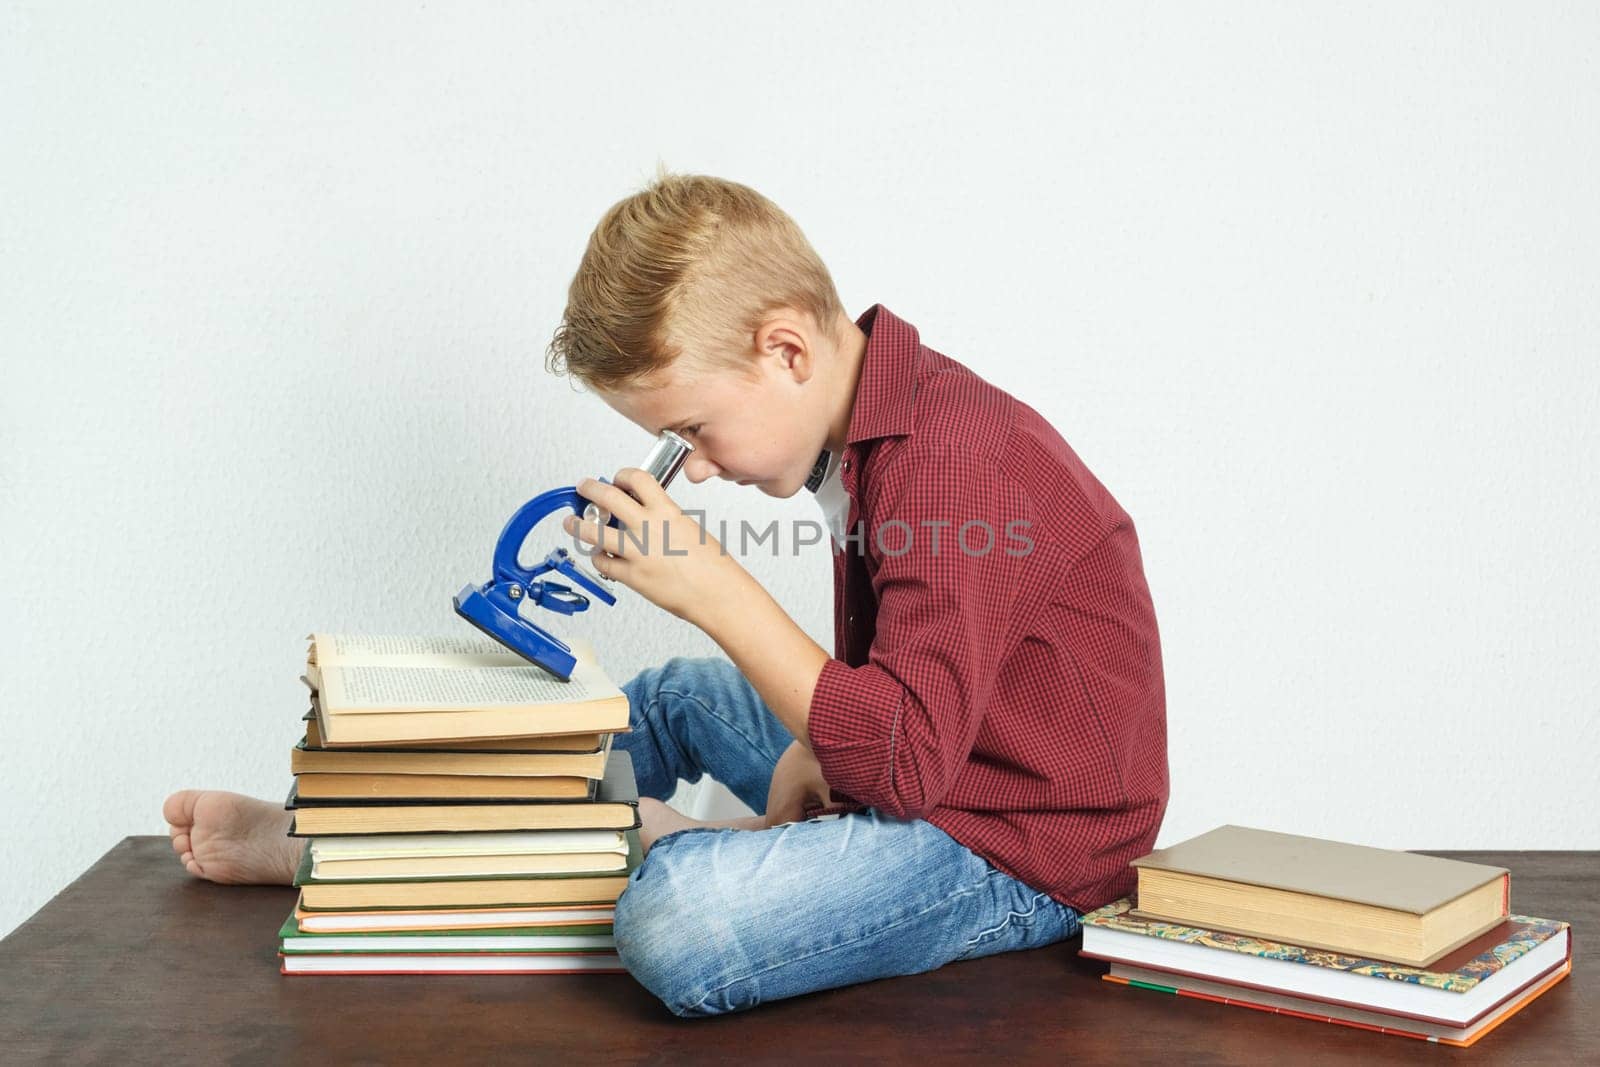 A schoolboy sits at a table near books and looks through a microscope. Education concept